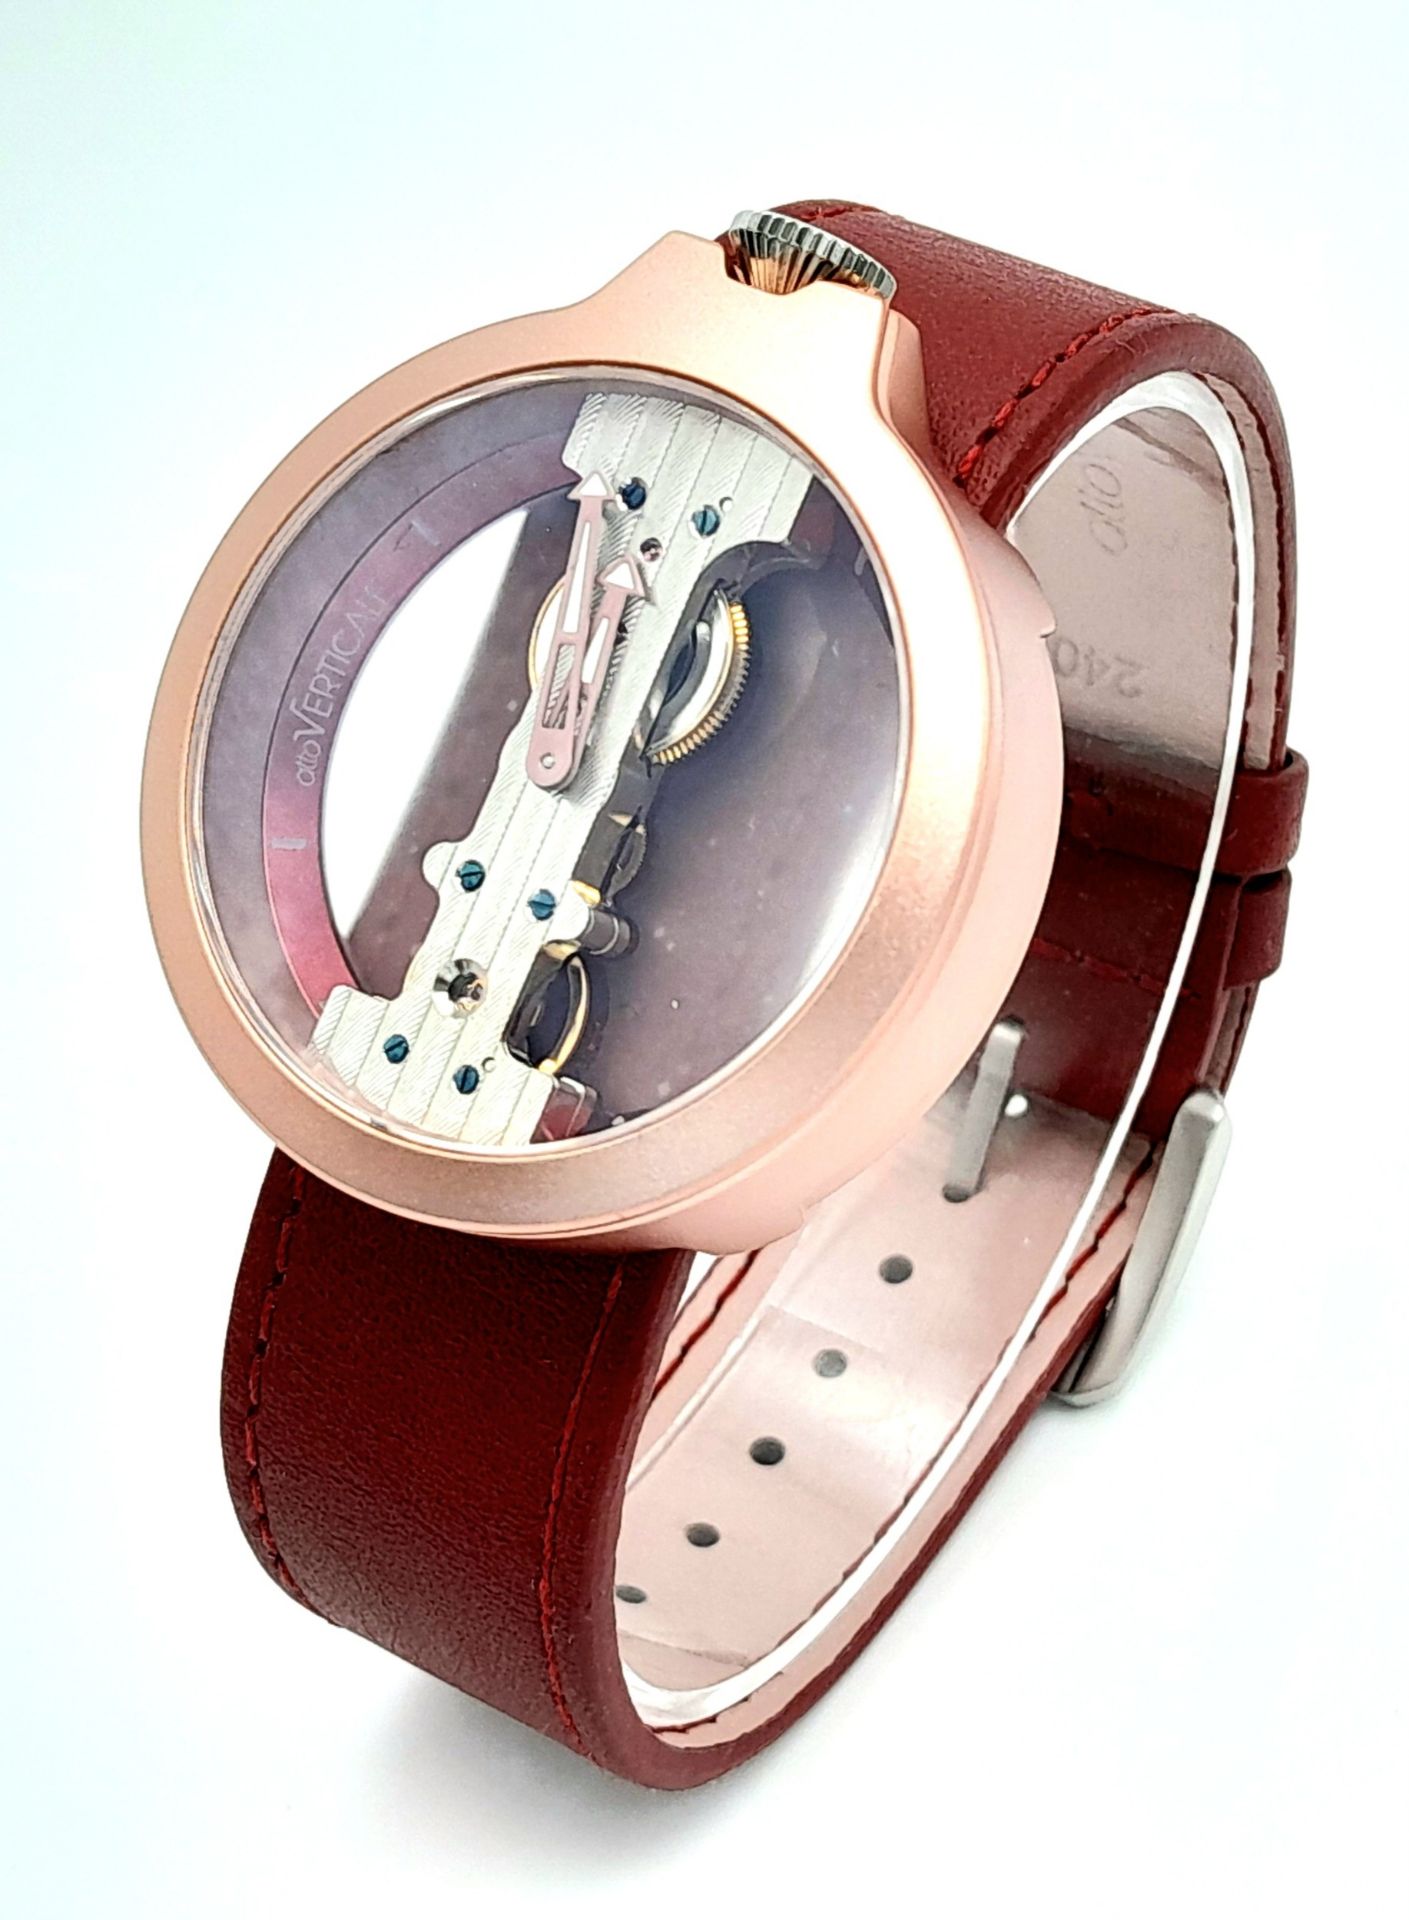 A Verticale Mechanical Top Winder Gents Watch. Red leather strap. Ceramic rose gold skeleton